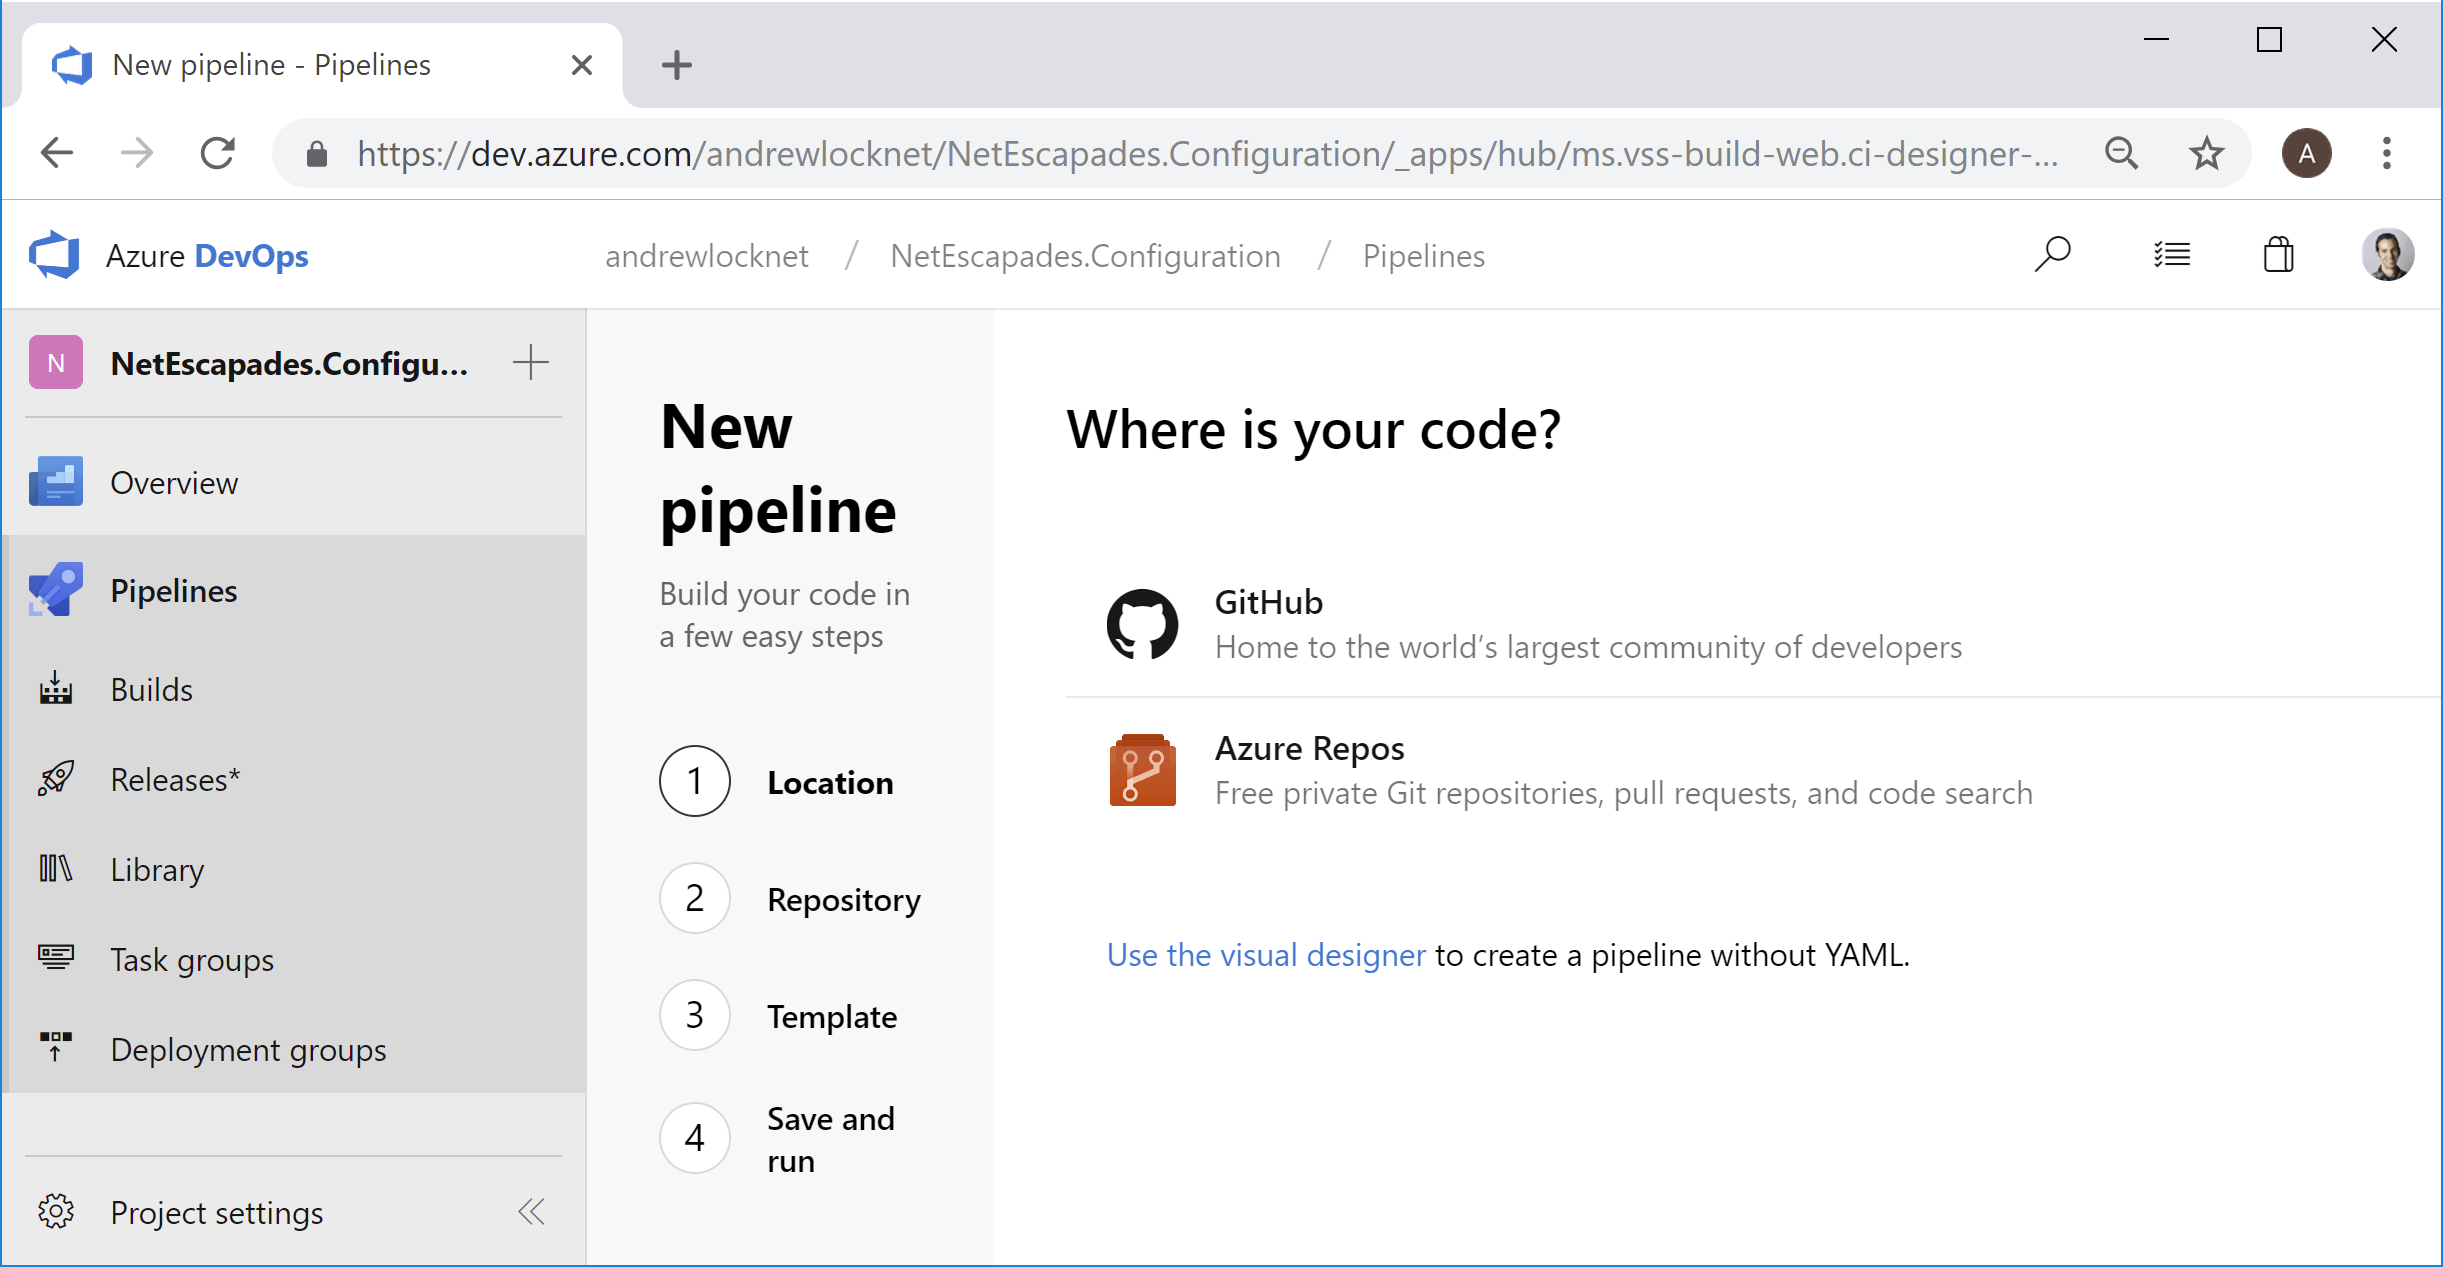 Step 1: Where is your code?